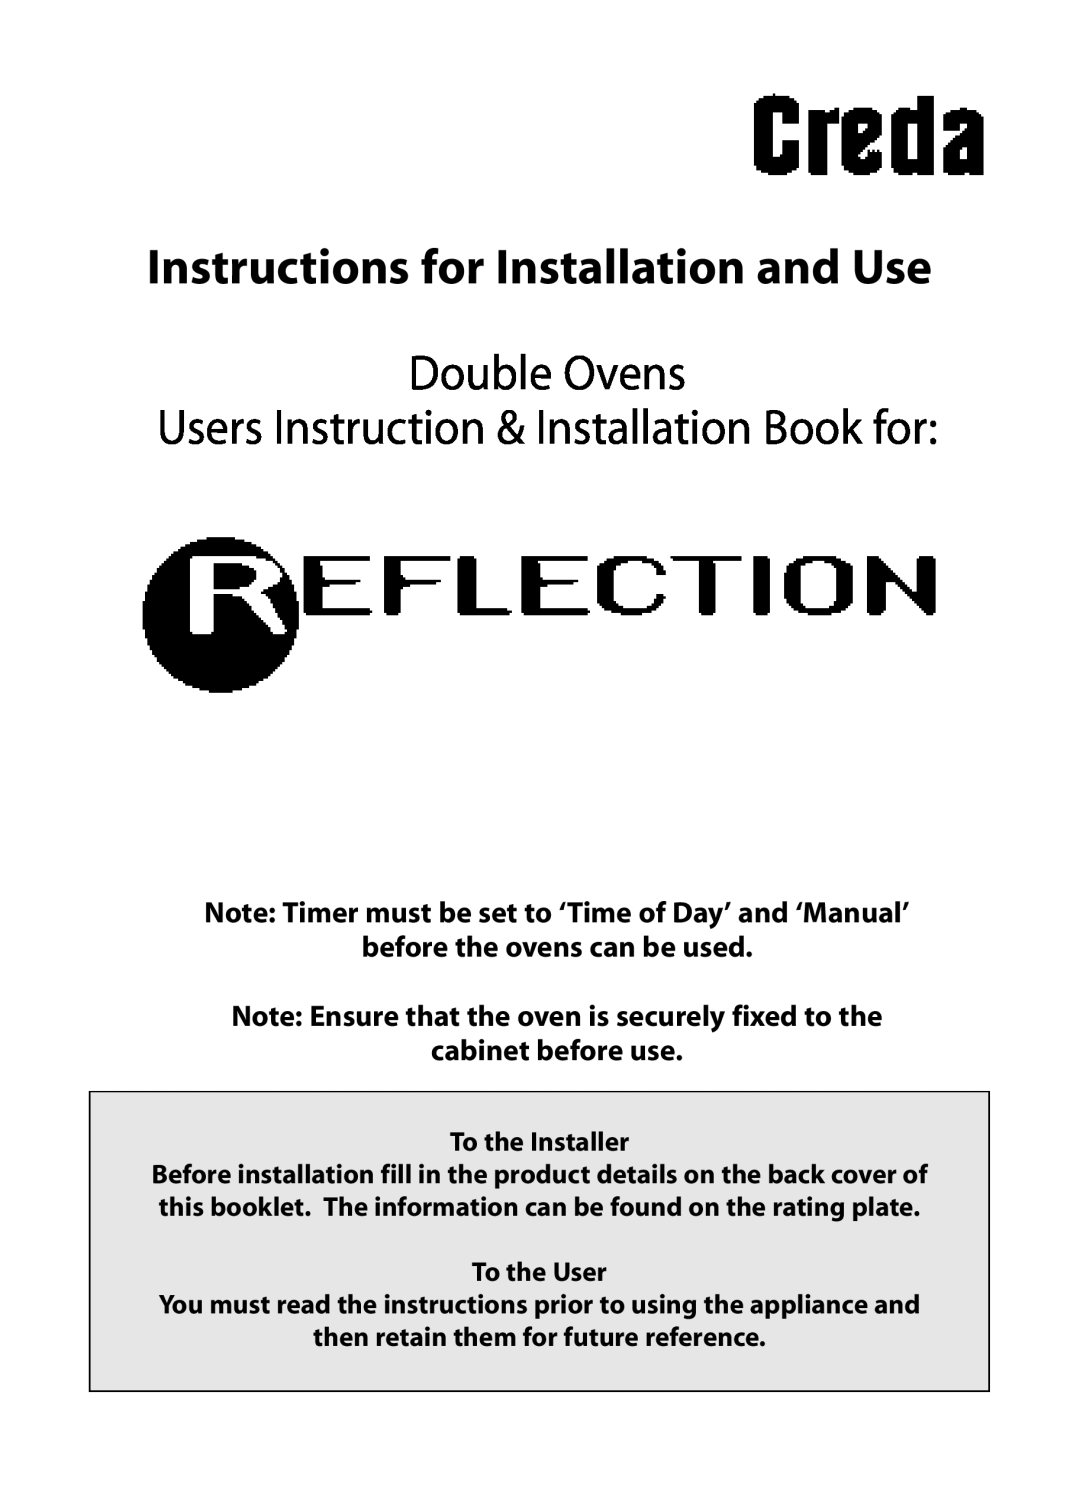 Creda manual Instructions for Installation and Use, Double Ovens, Users Instruction & Installation Book for 